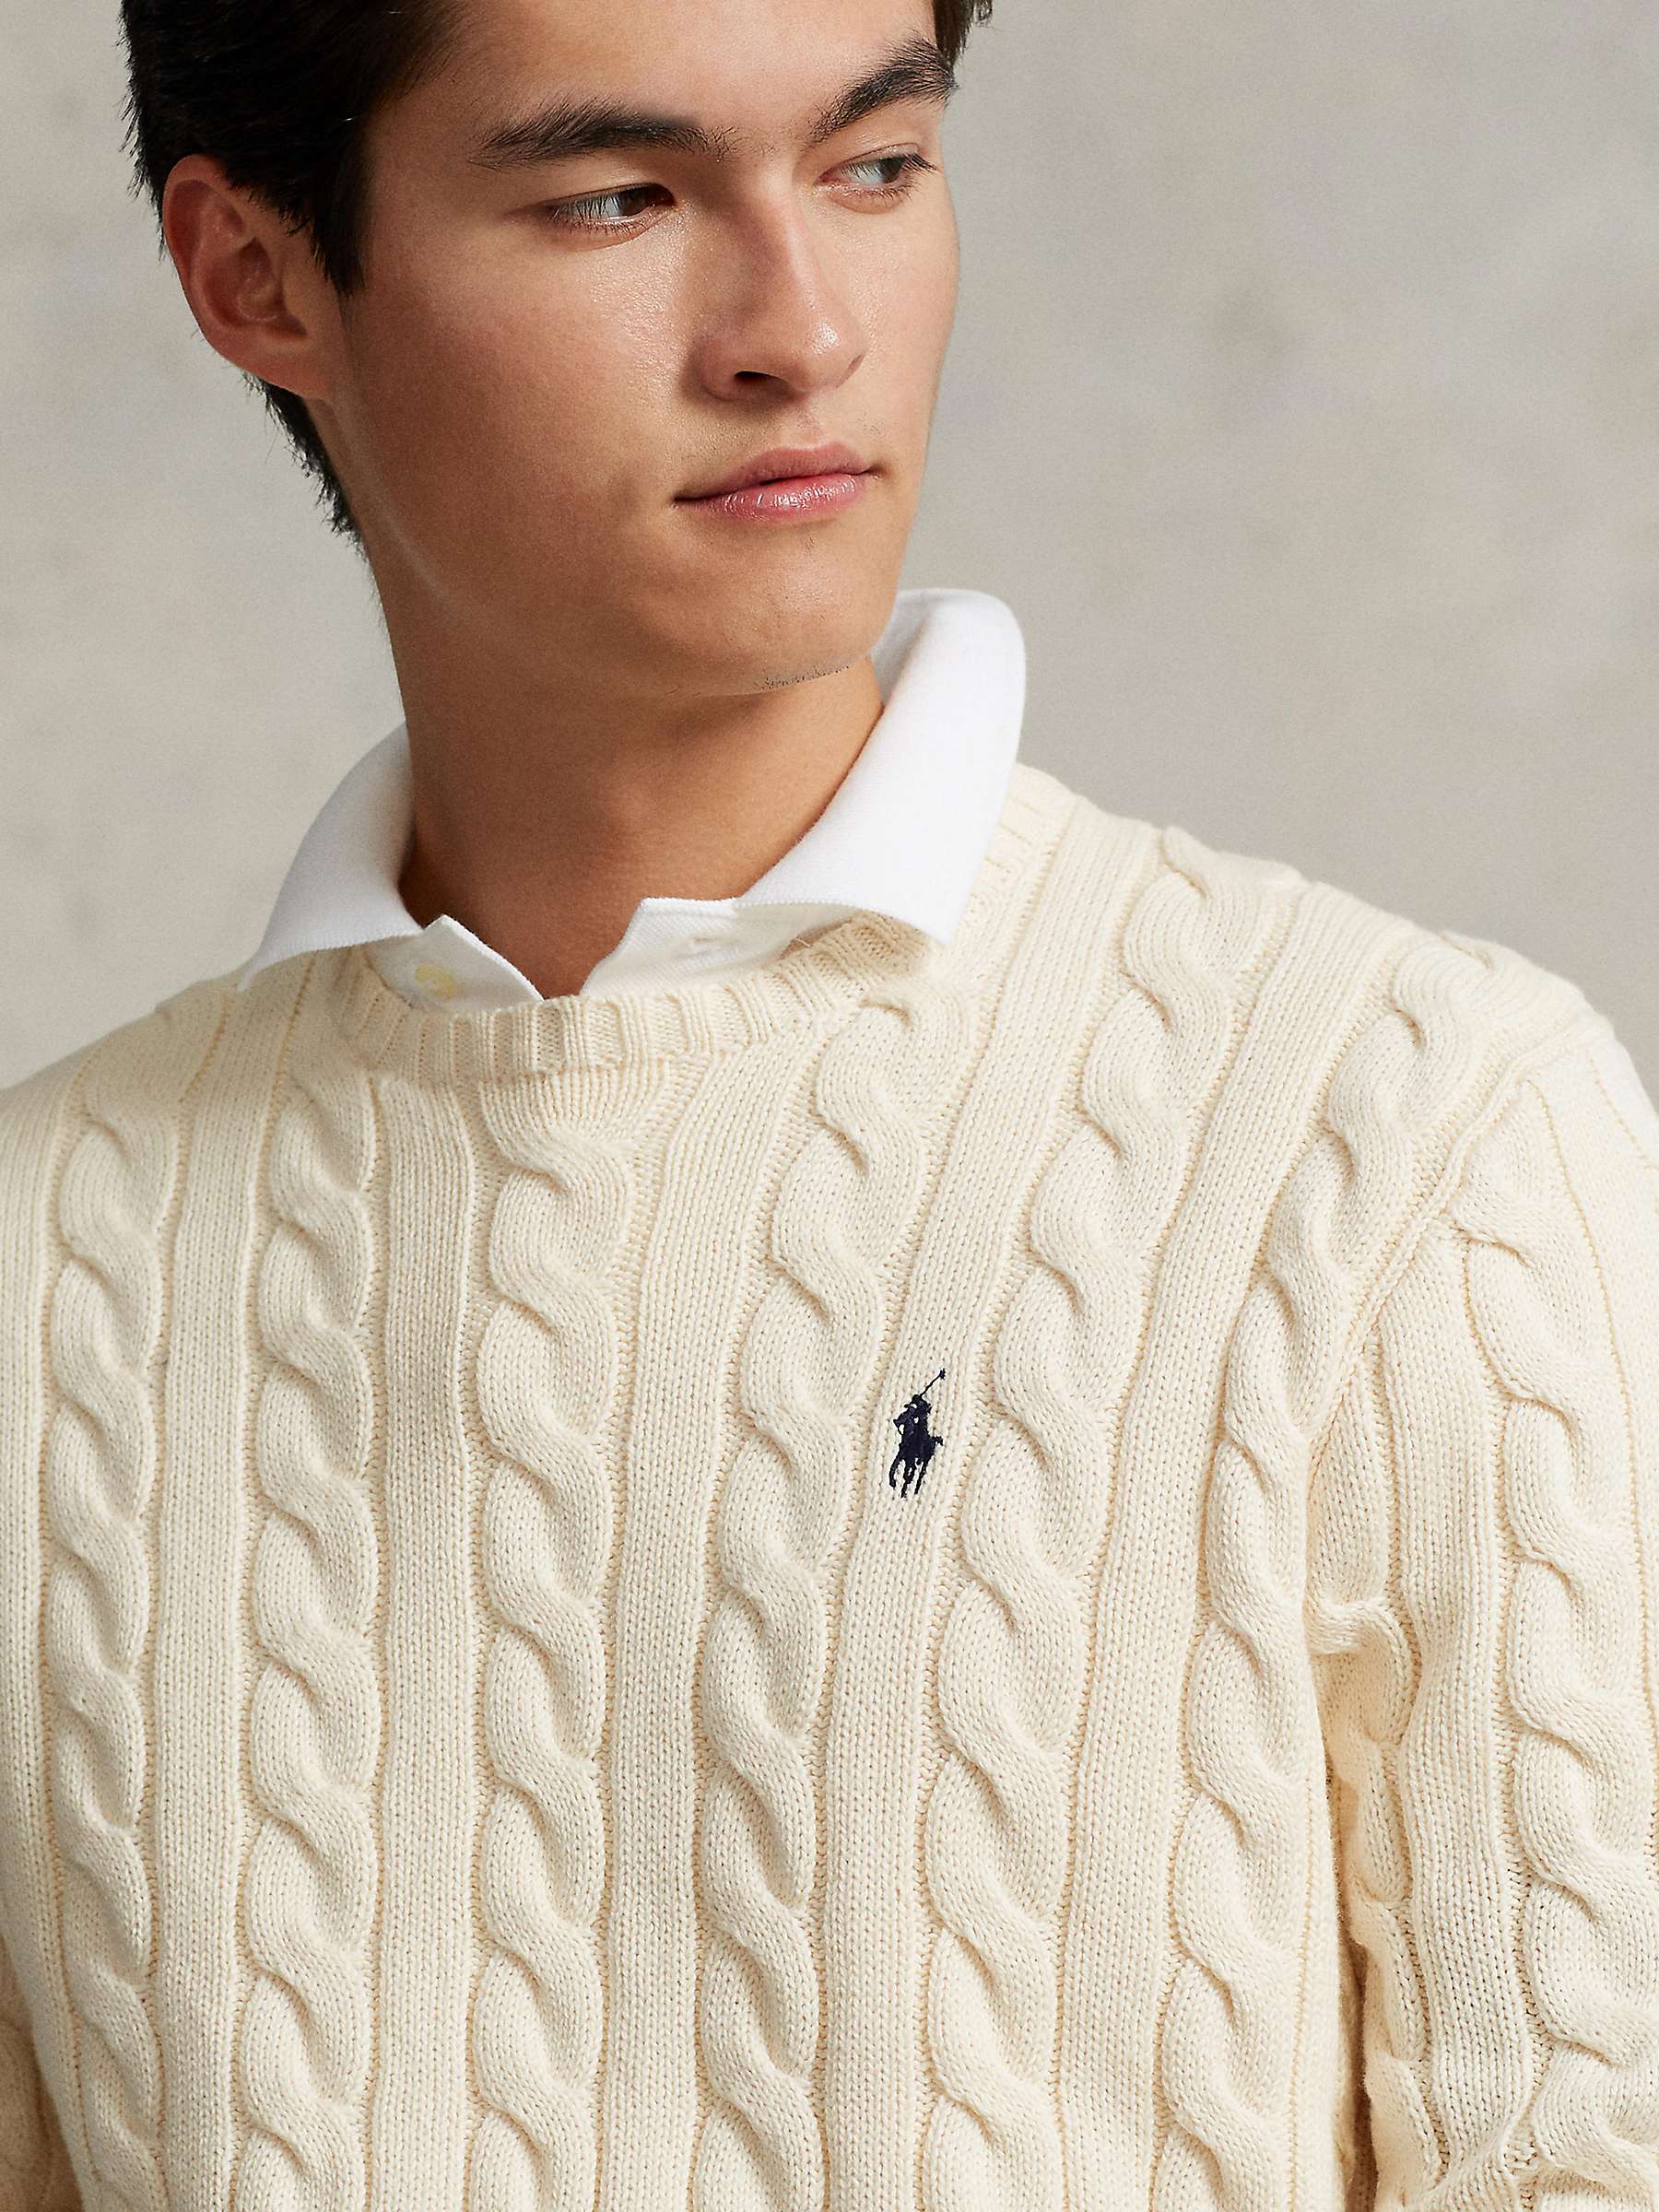 Buy Polo Ralph Lauren Long Sleeve Cable Knit Jumper, Andover Cream Online at johnlewis.com